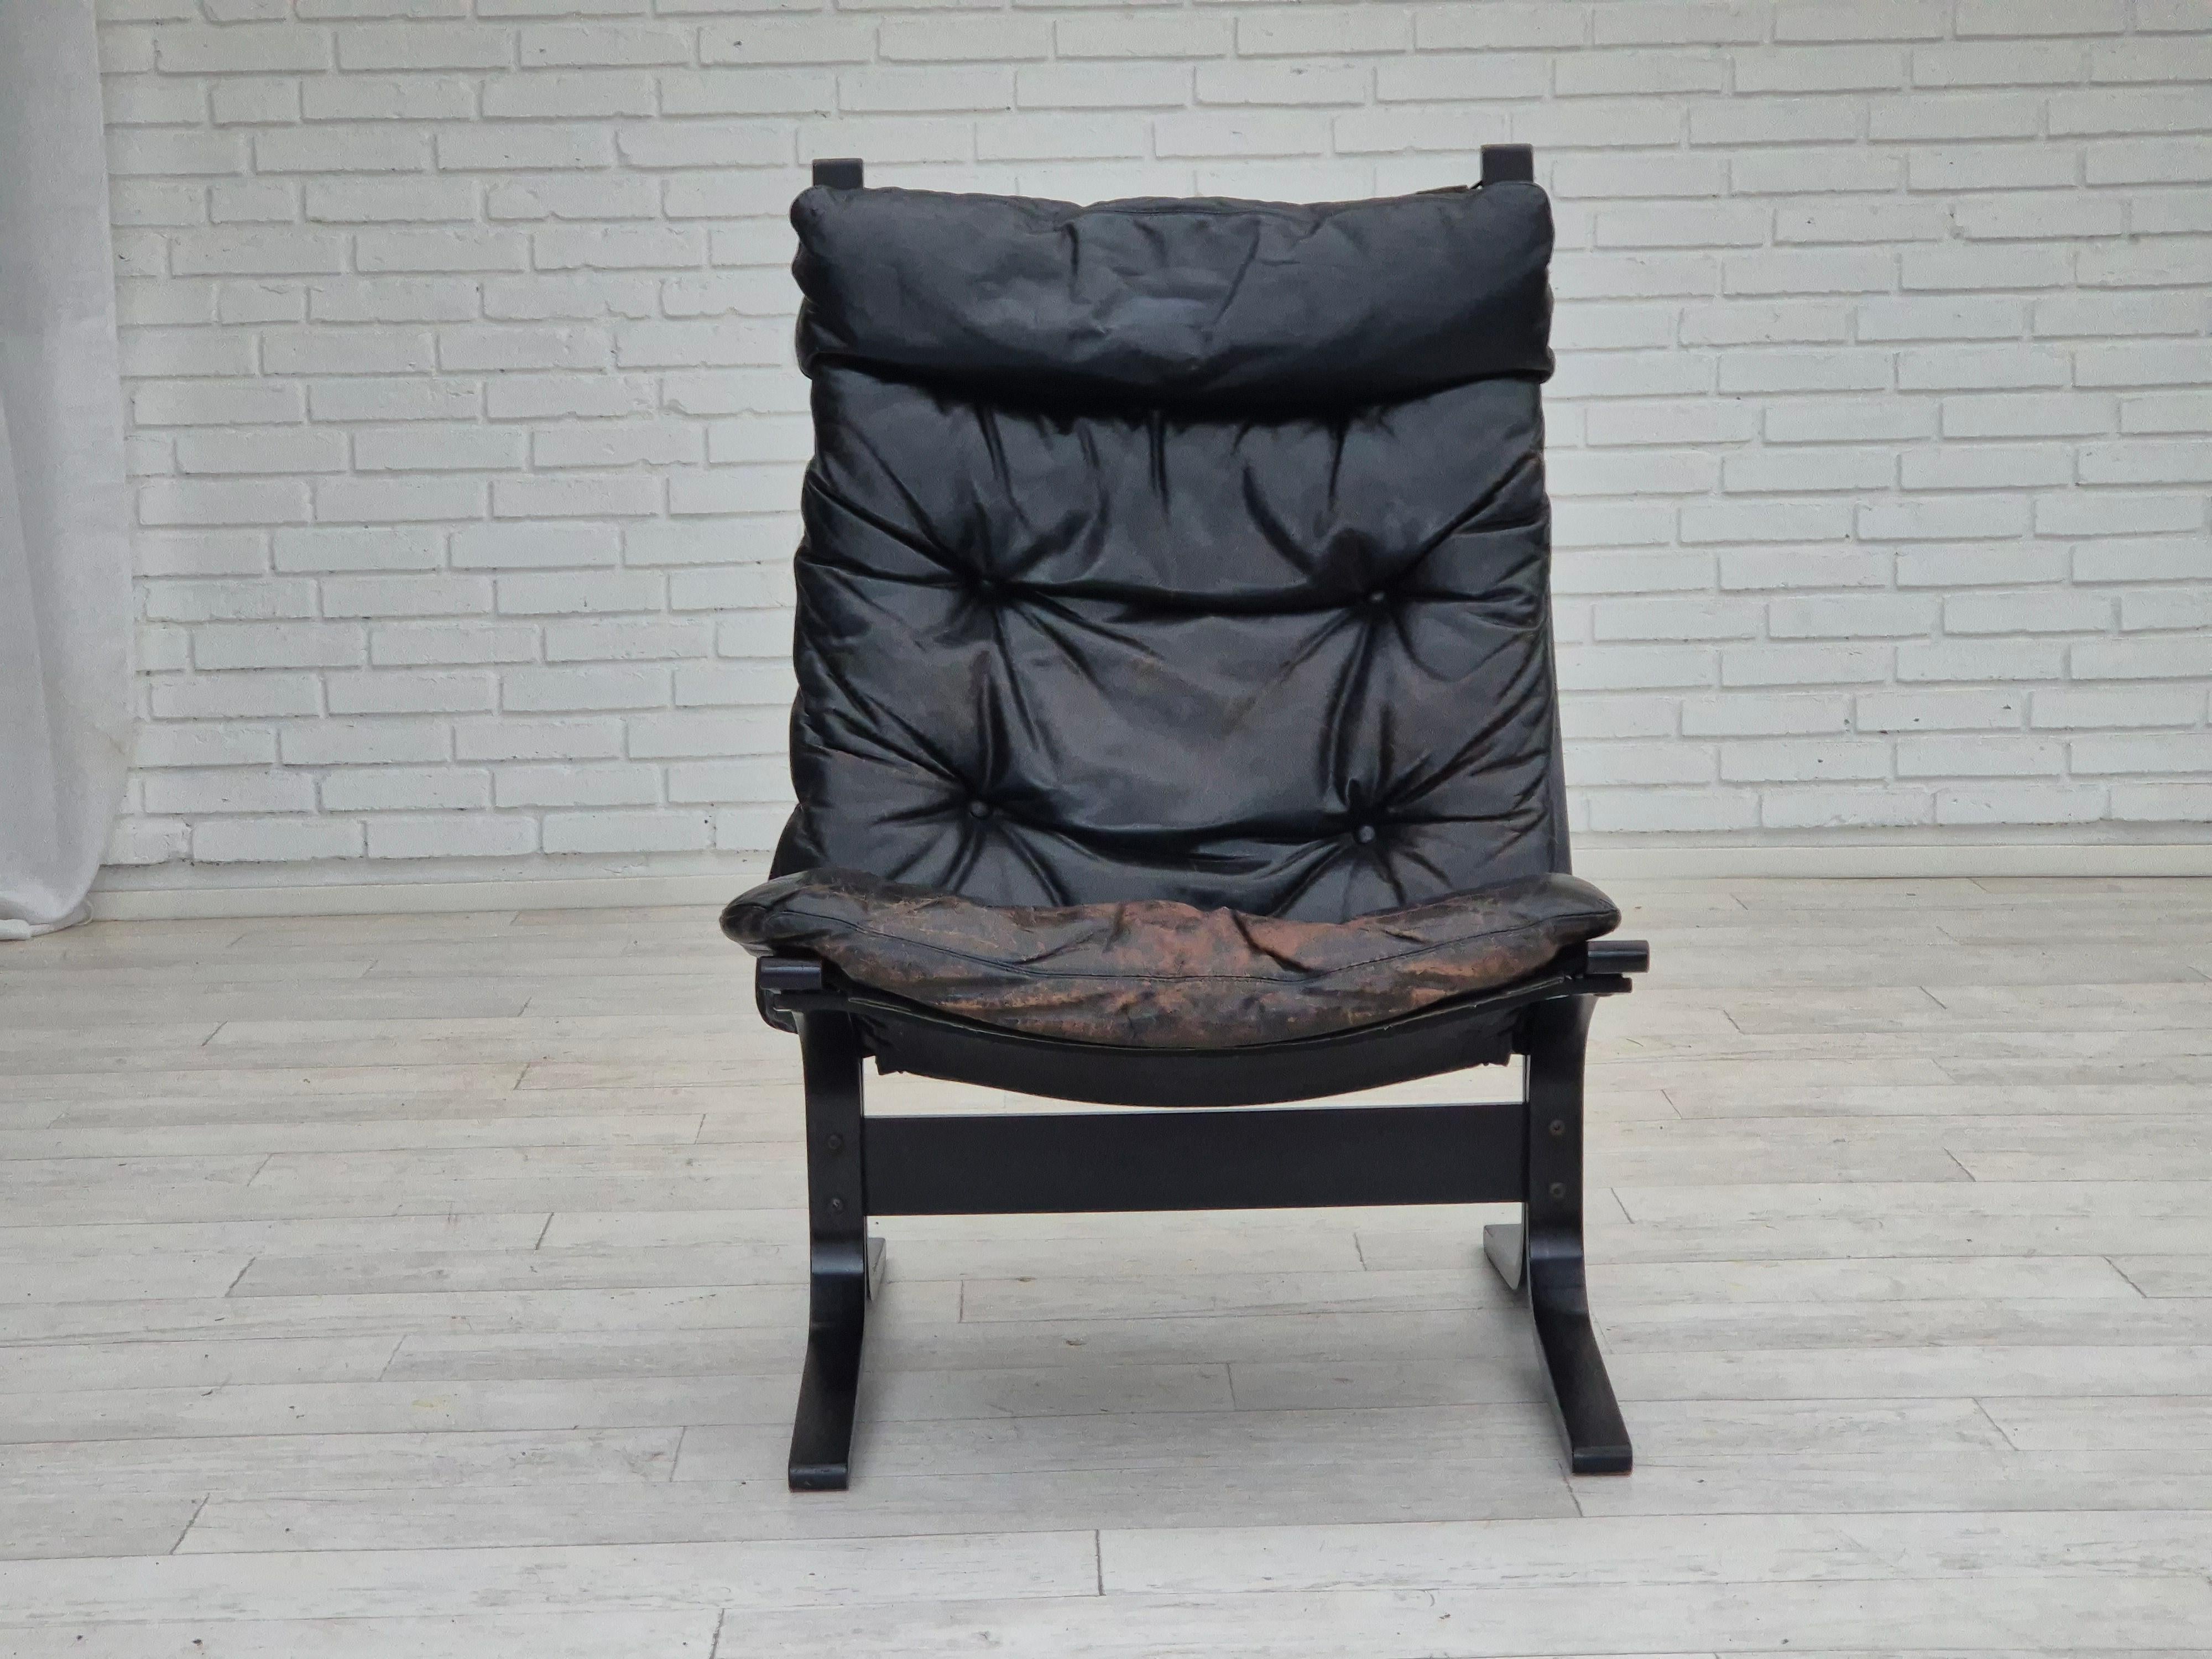 Scandinave moderne 1970, Design/One, chaise longue 